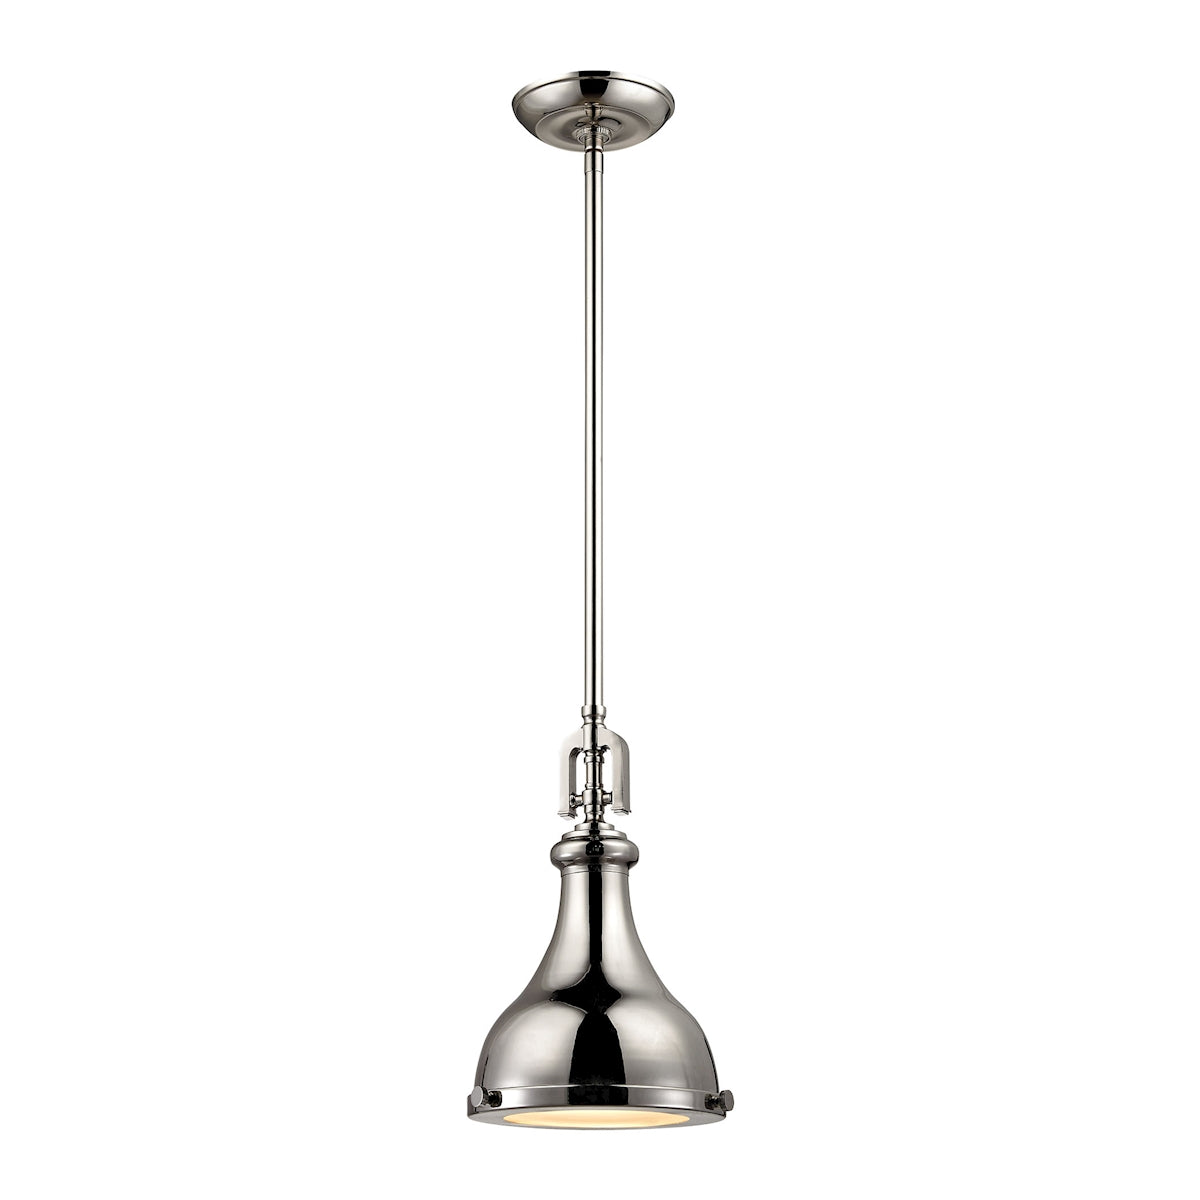 ELK Lighting 57030/1 Rutherford 1-Light Mini Pendant in Polished Nickel with Metal Shade